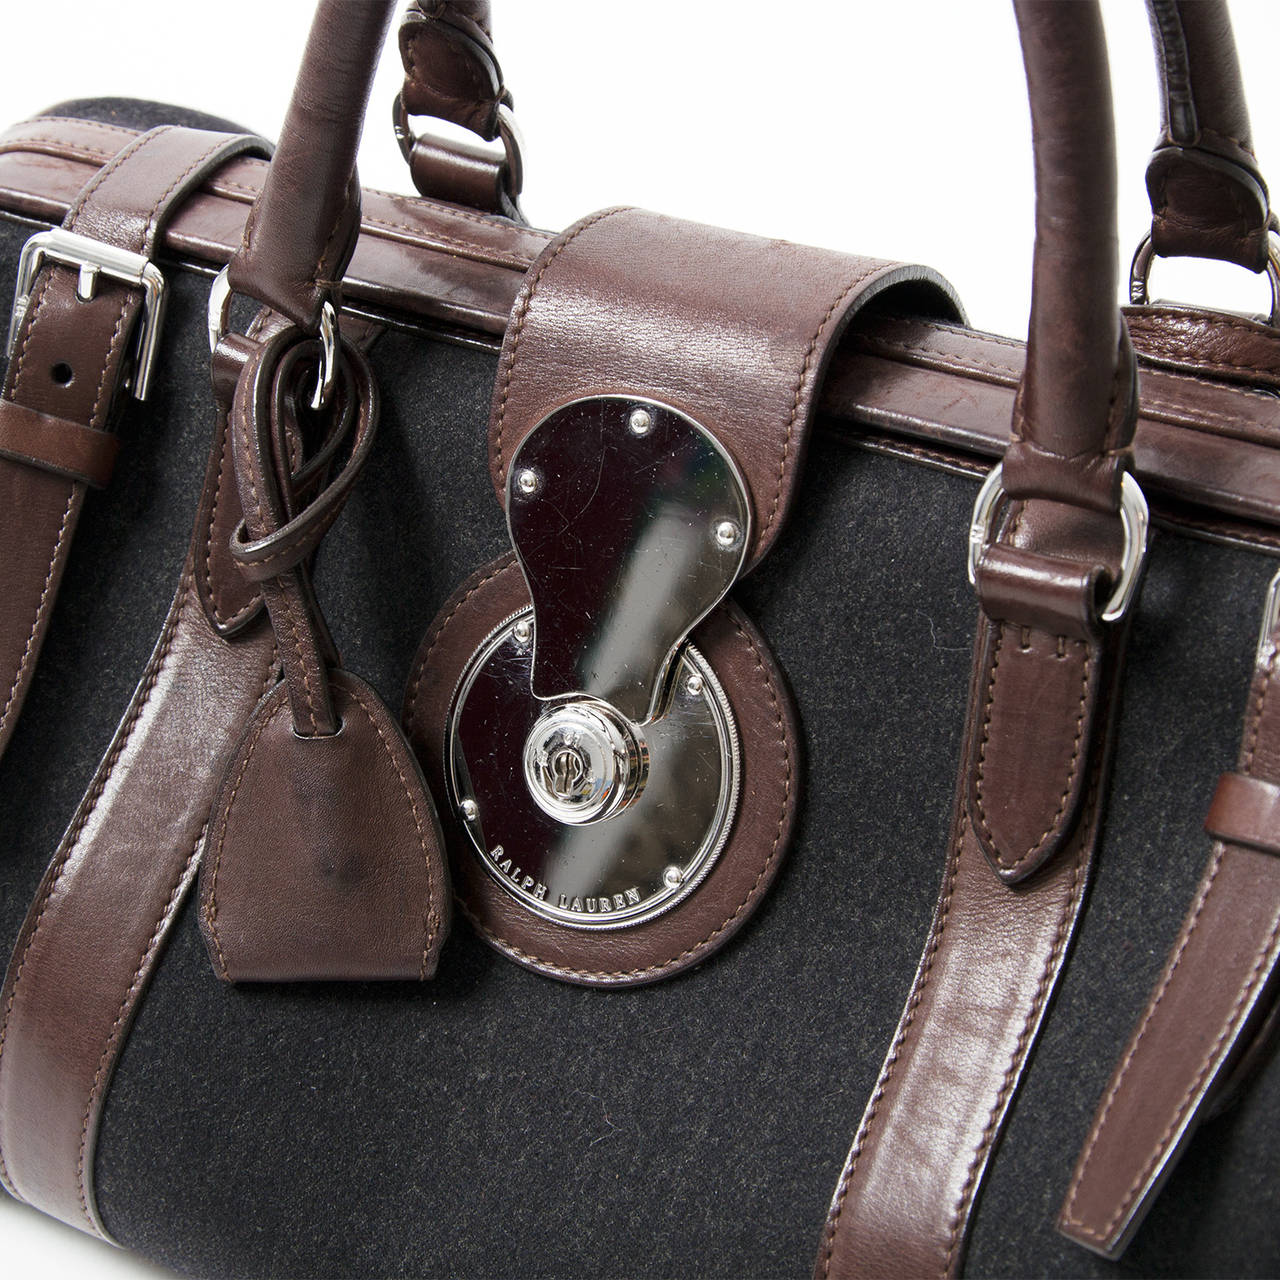 This Ralph Lauren doctor's purse is a structured top handle bag with anthracite textile body and dark brown trim. Silver-tone hardware.